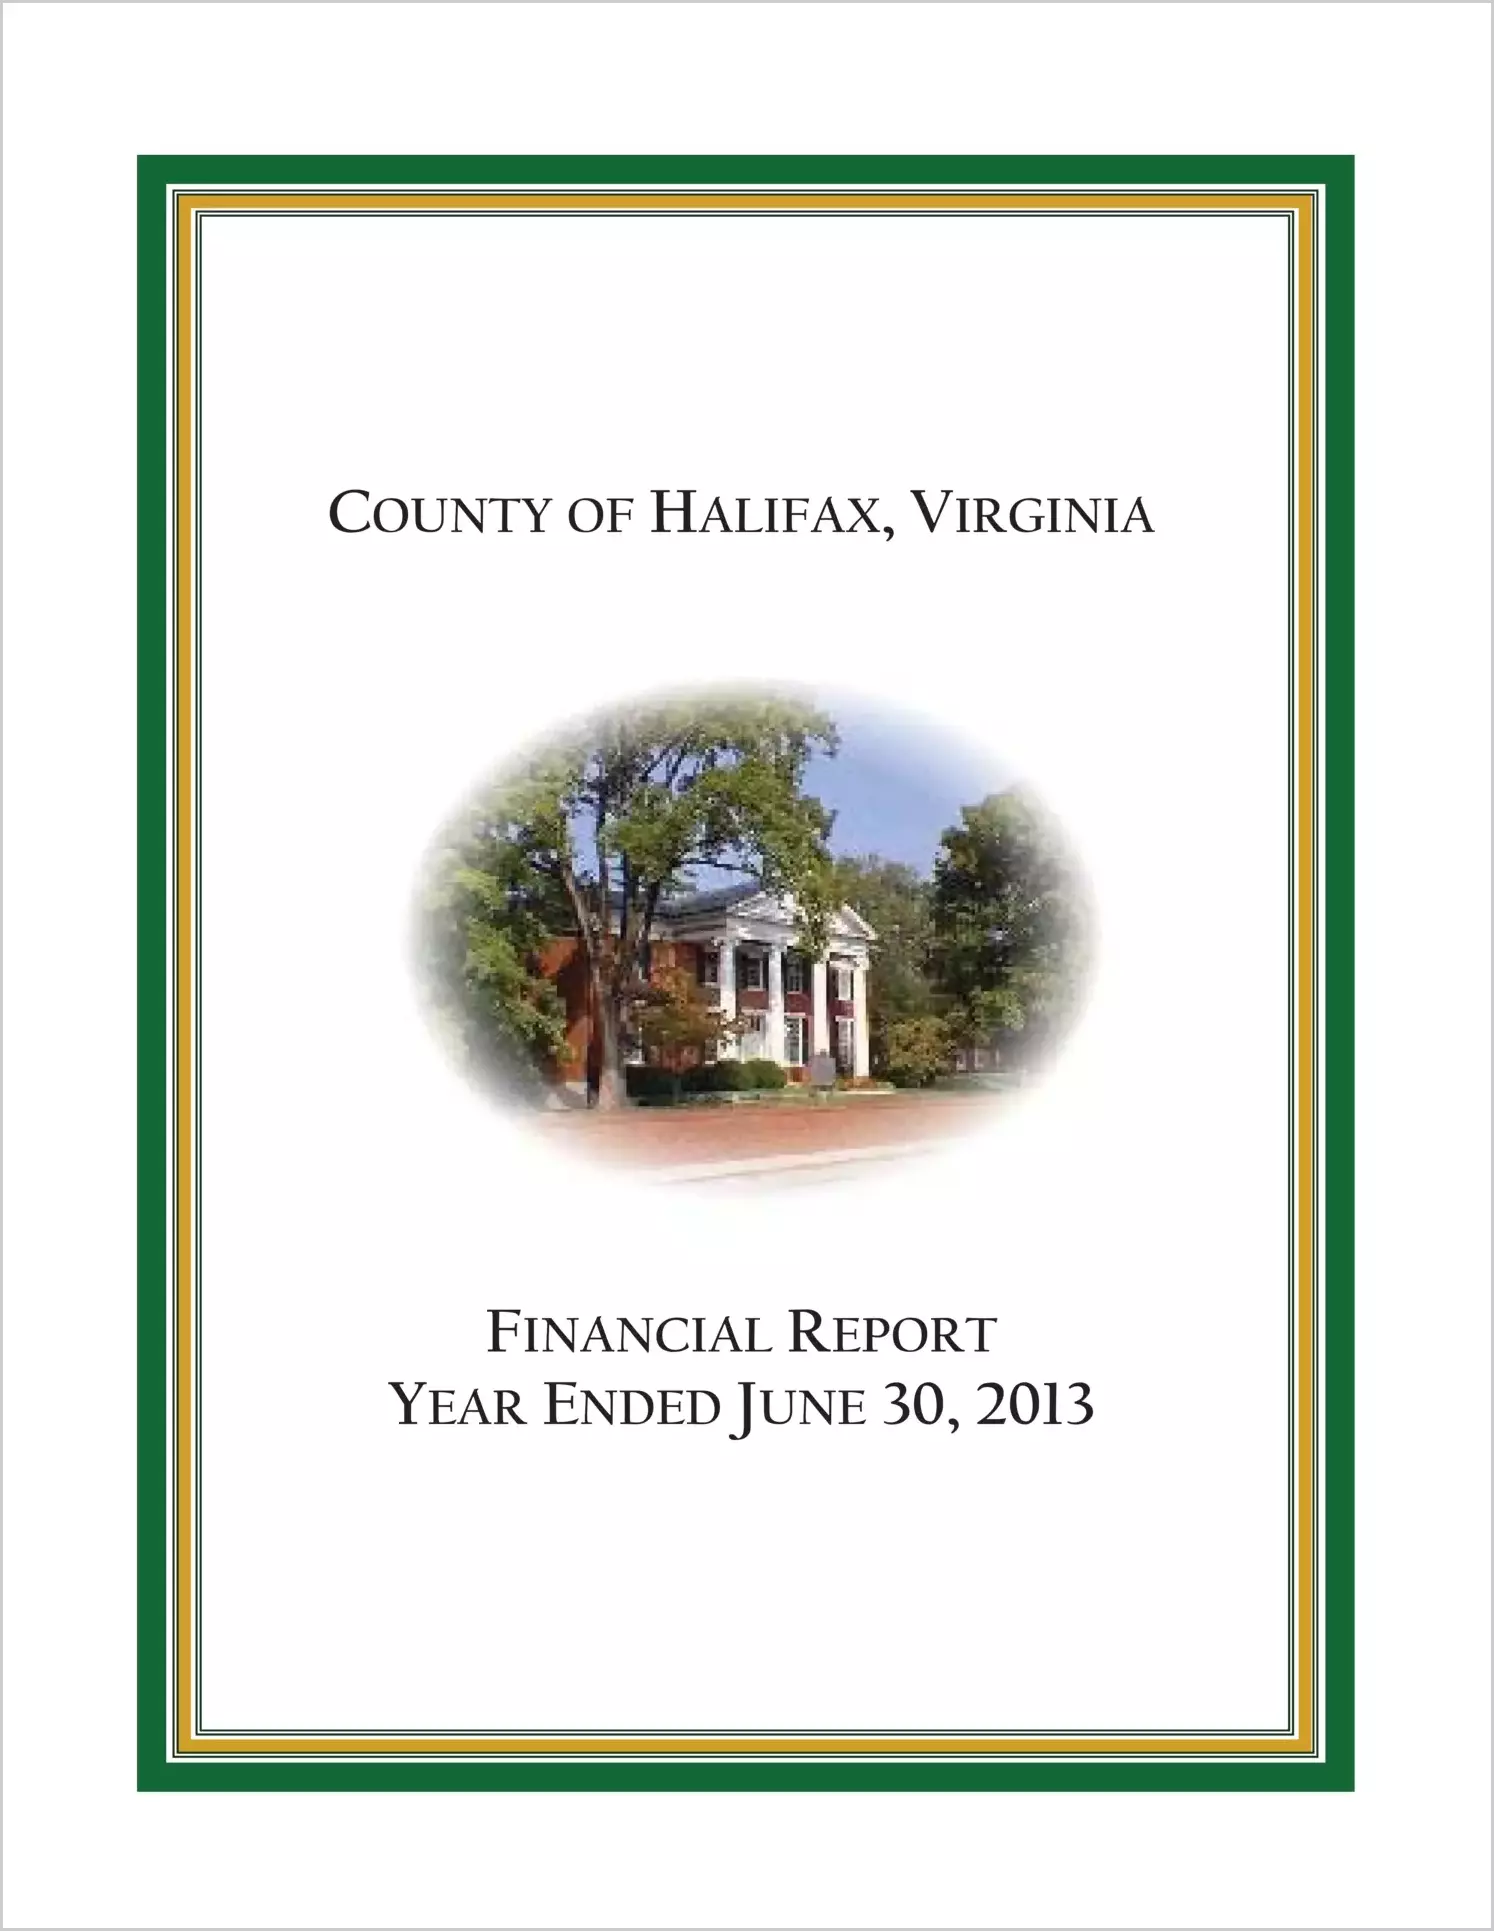 2013 Annual Financial Report for County of Halifax